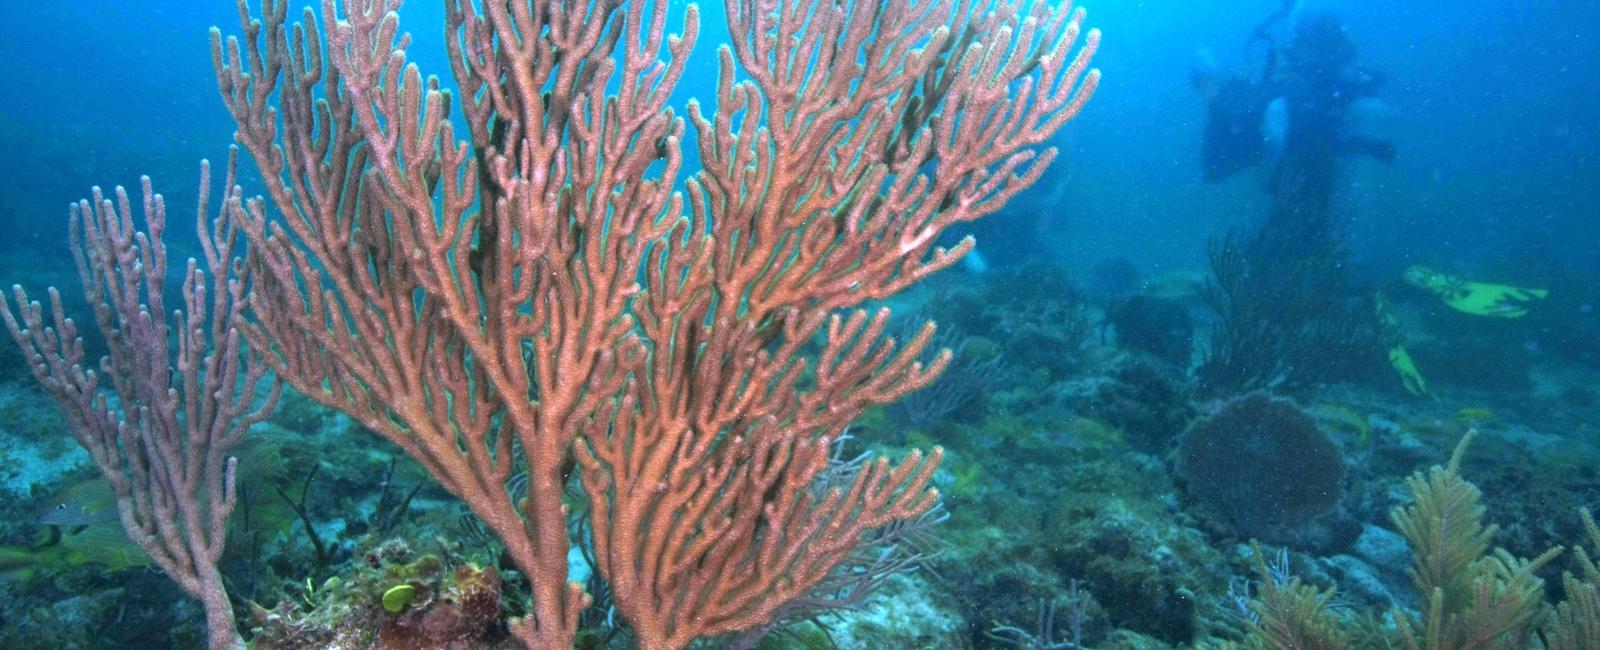 85 of plant life is found in the ocean